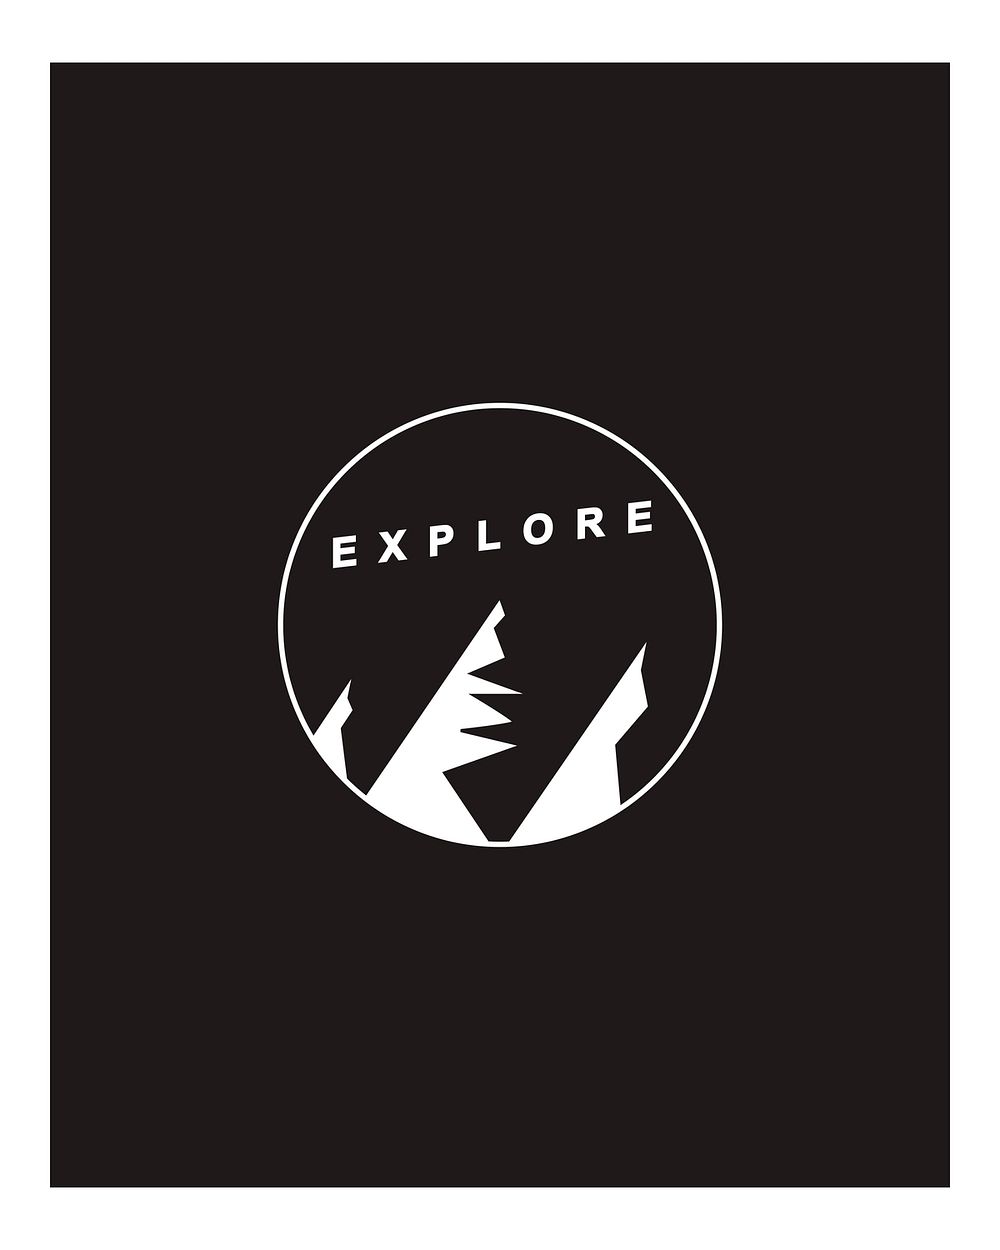 Explore illustration wall art print and poster.